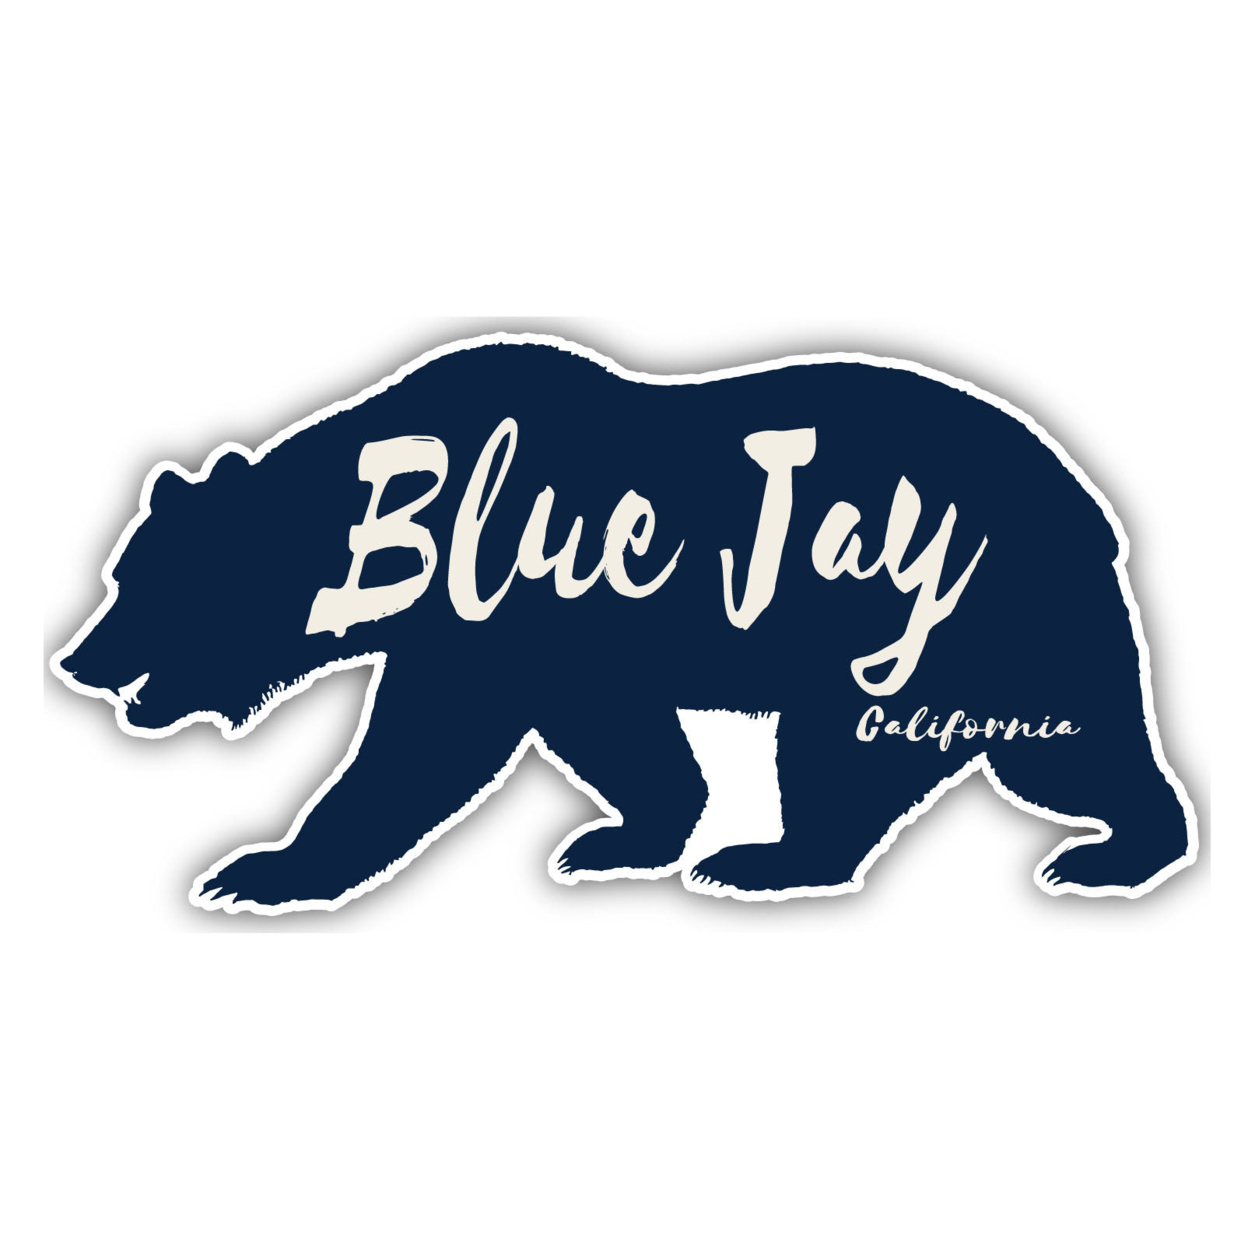 Blue Jay California Souvenir Decorative Stickers (Choose Theme And Size) - 4-Pack, 4-Inch, Bear